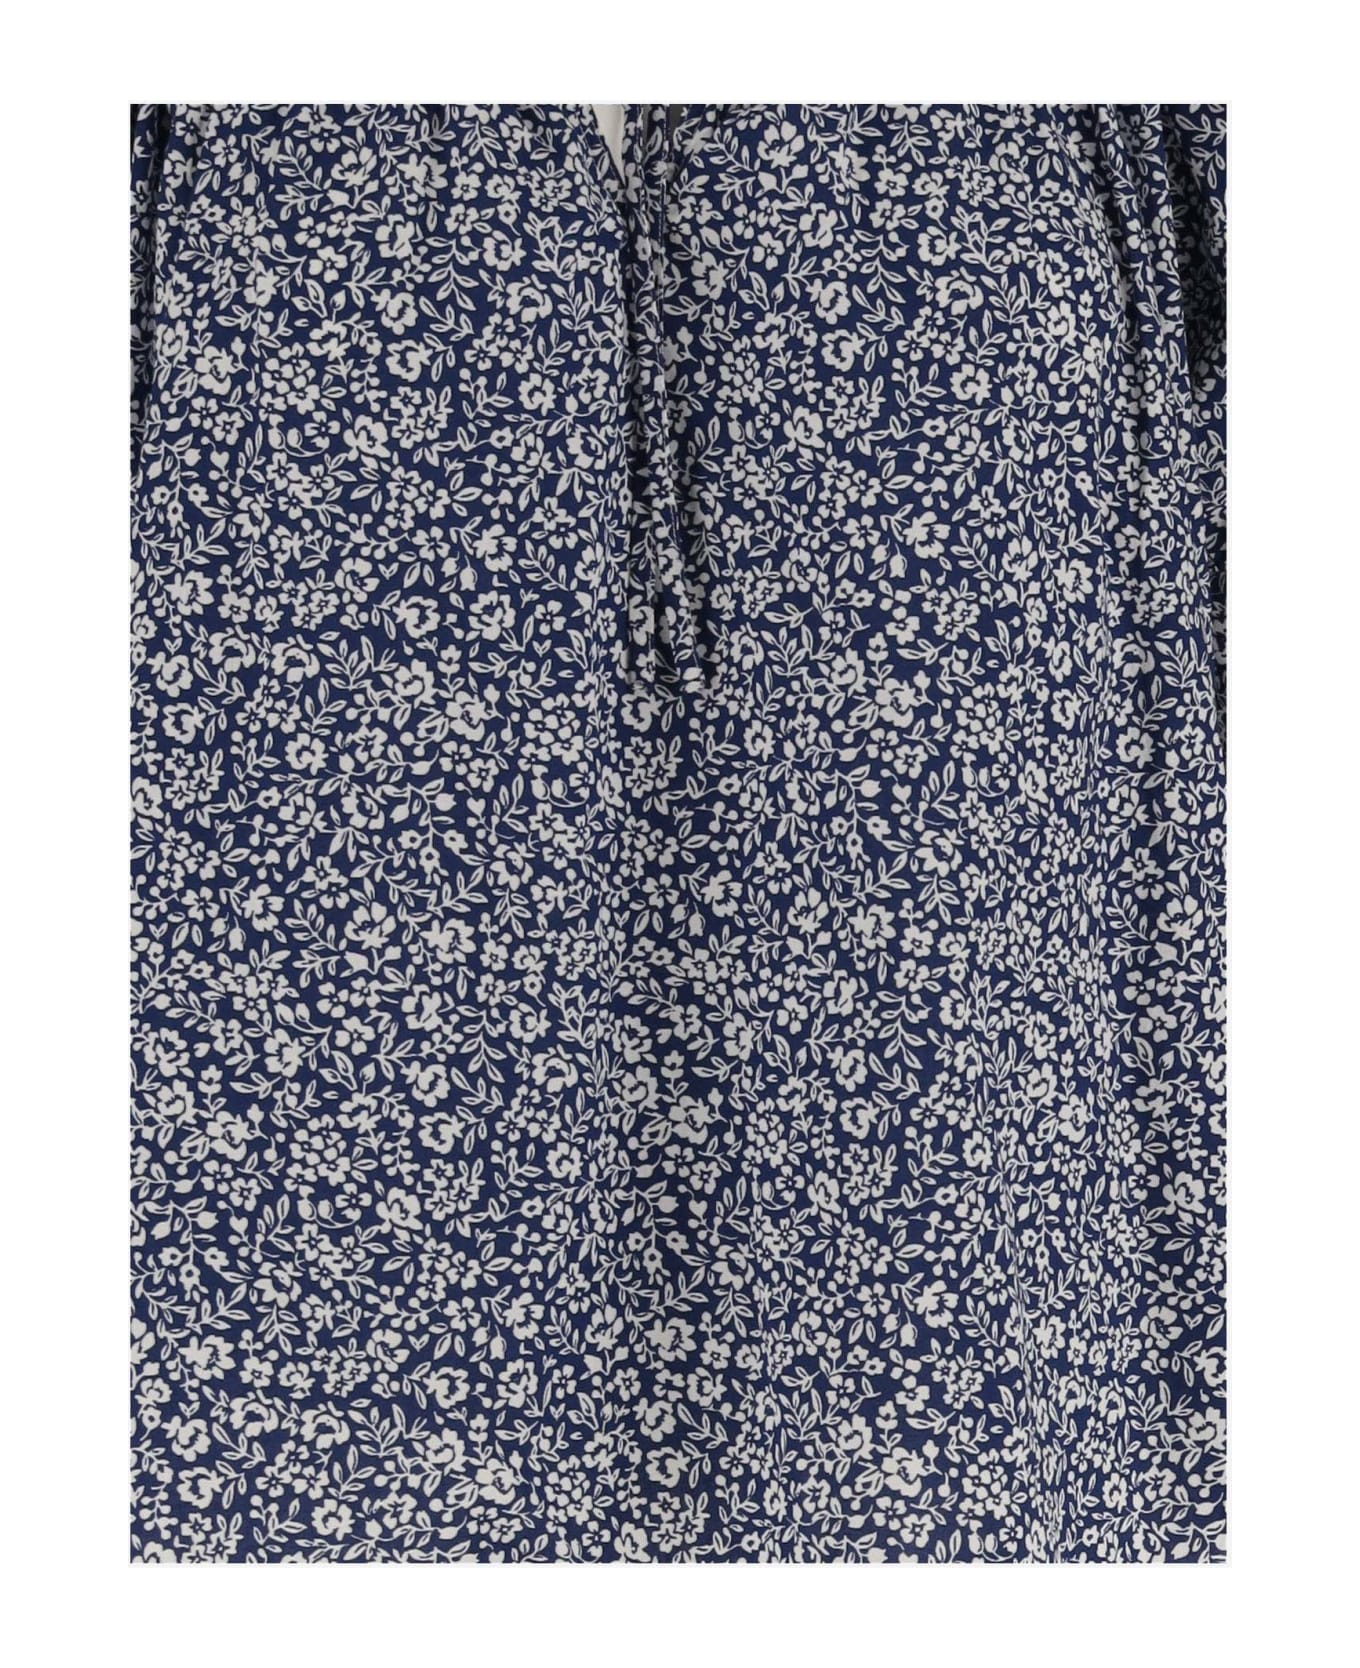 Polo Ralph Lauren Cotton Shirt With Floral Pattern - Blue ブラウス